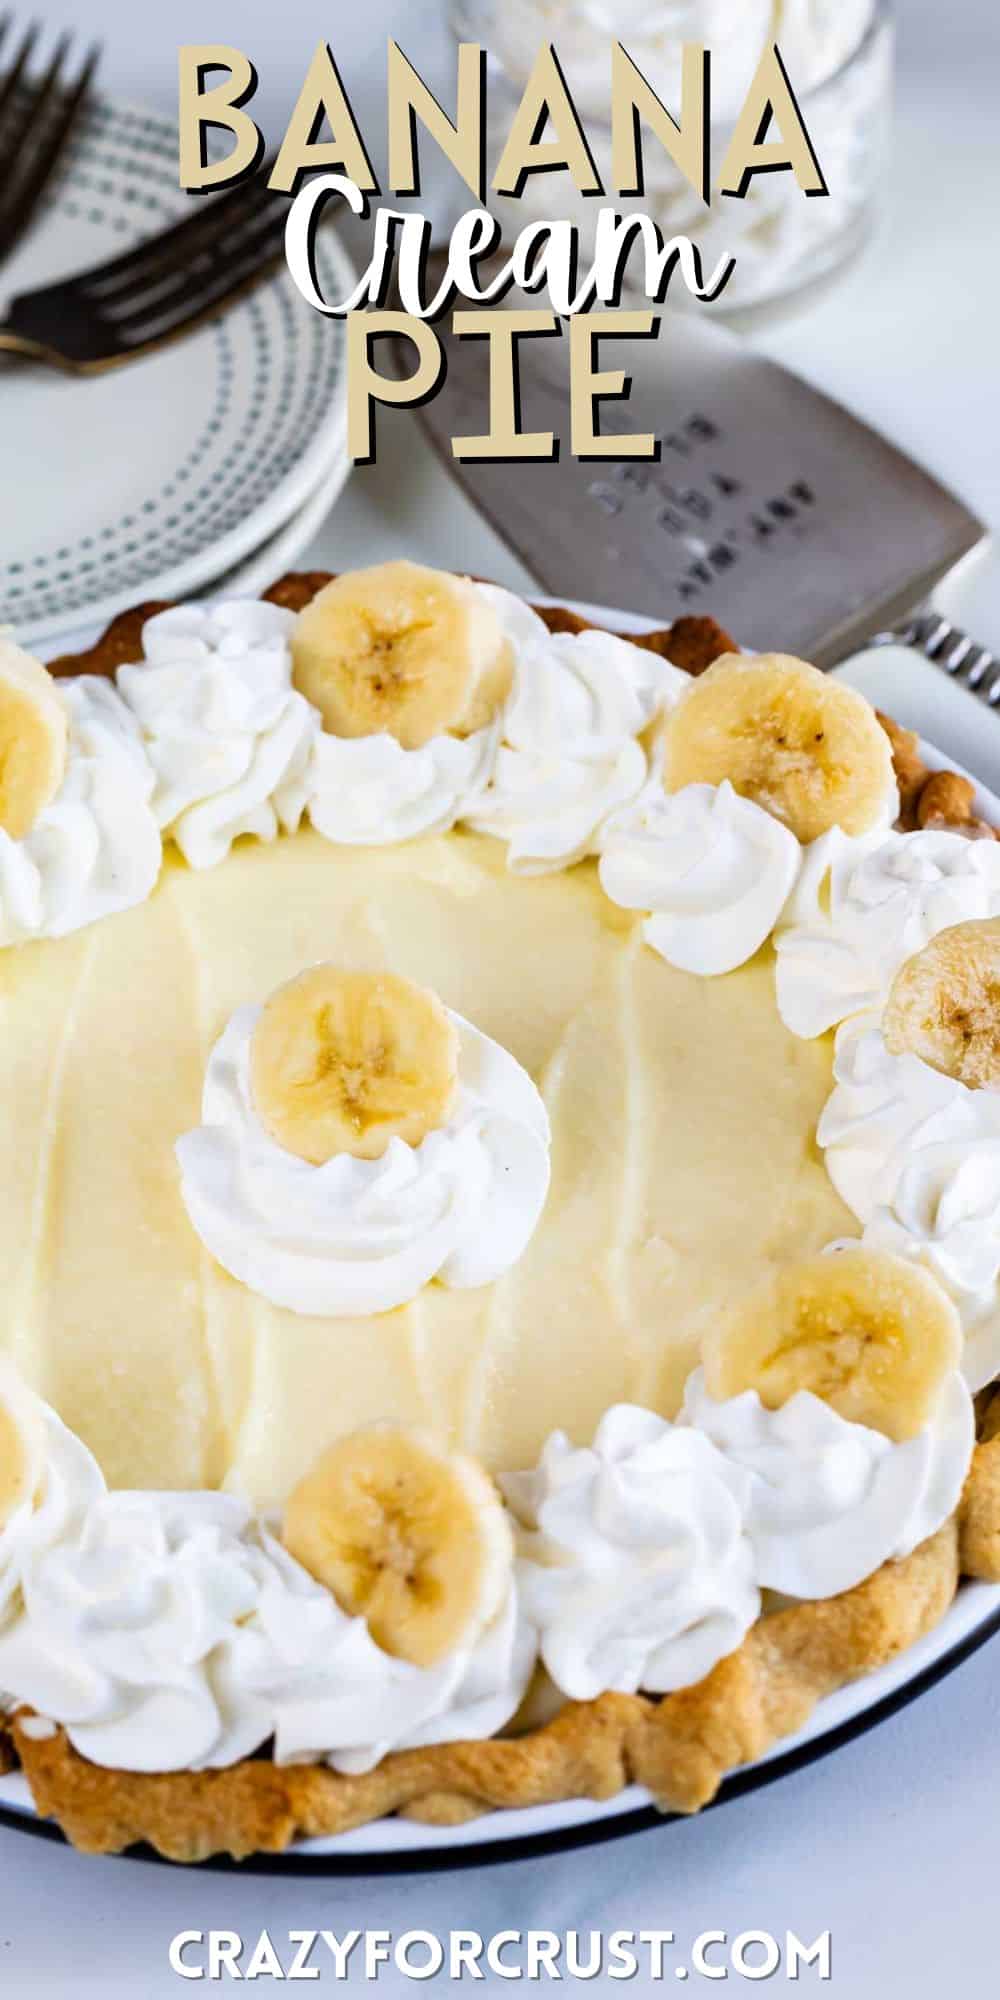 banana cream pie with sliced bananas on top with words on the image.